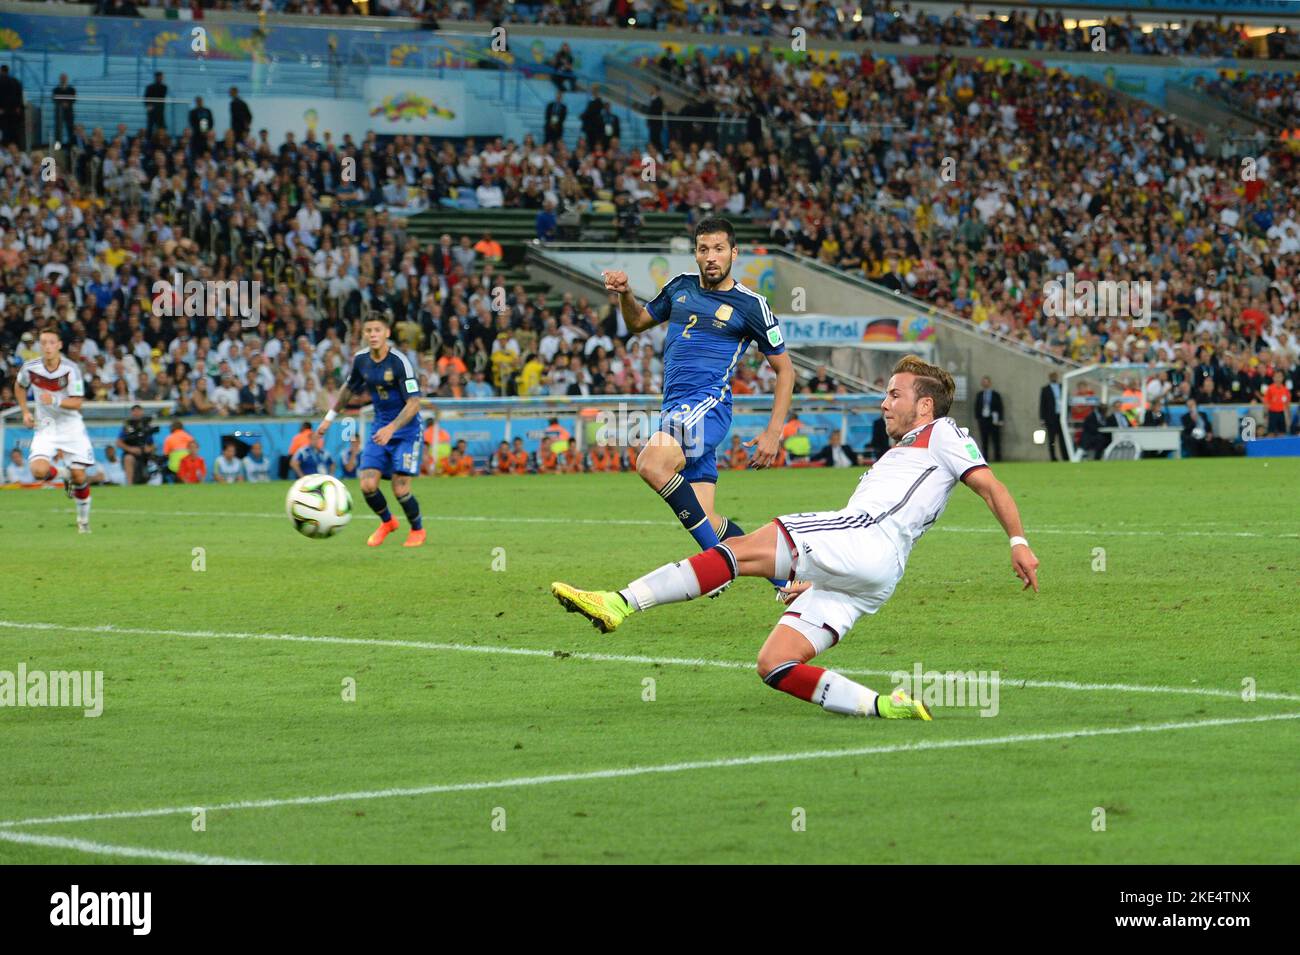 World Cup hero 2014 Mario Goetze in the squad for the World Cup in Qatar. archive photo; Mario GOETZE;Gâ? TZE (GER) shoots the goal to 1-0, winning goal, action, goal shot, hi:Ezequiel GARAY (ARG). Germany (GER))-Argentina (ARG) 1-0 aet final, final, game 64, on July 13th, 2014 in Rio de Janeiro. Soccer World Cup 2014 in Brazil from 12.06. - 07/13/2014. Stock Photo